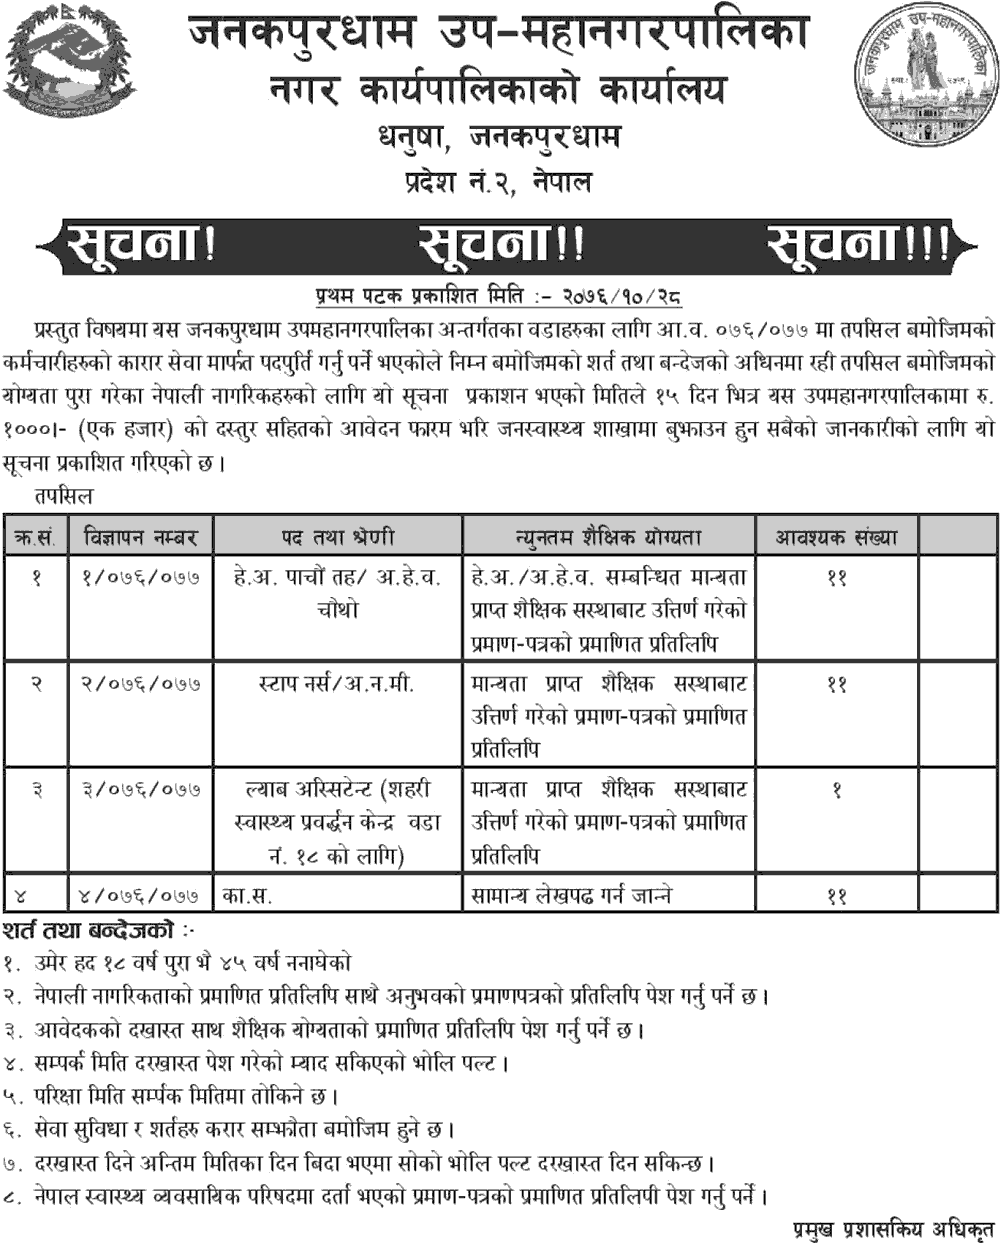 Janakpur Sub Metropolitan City Vacancy for Health Services and Office Assistant